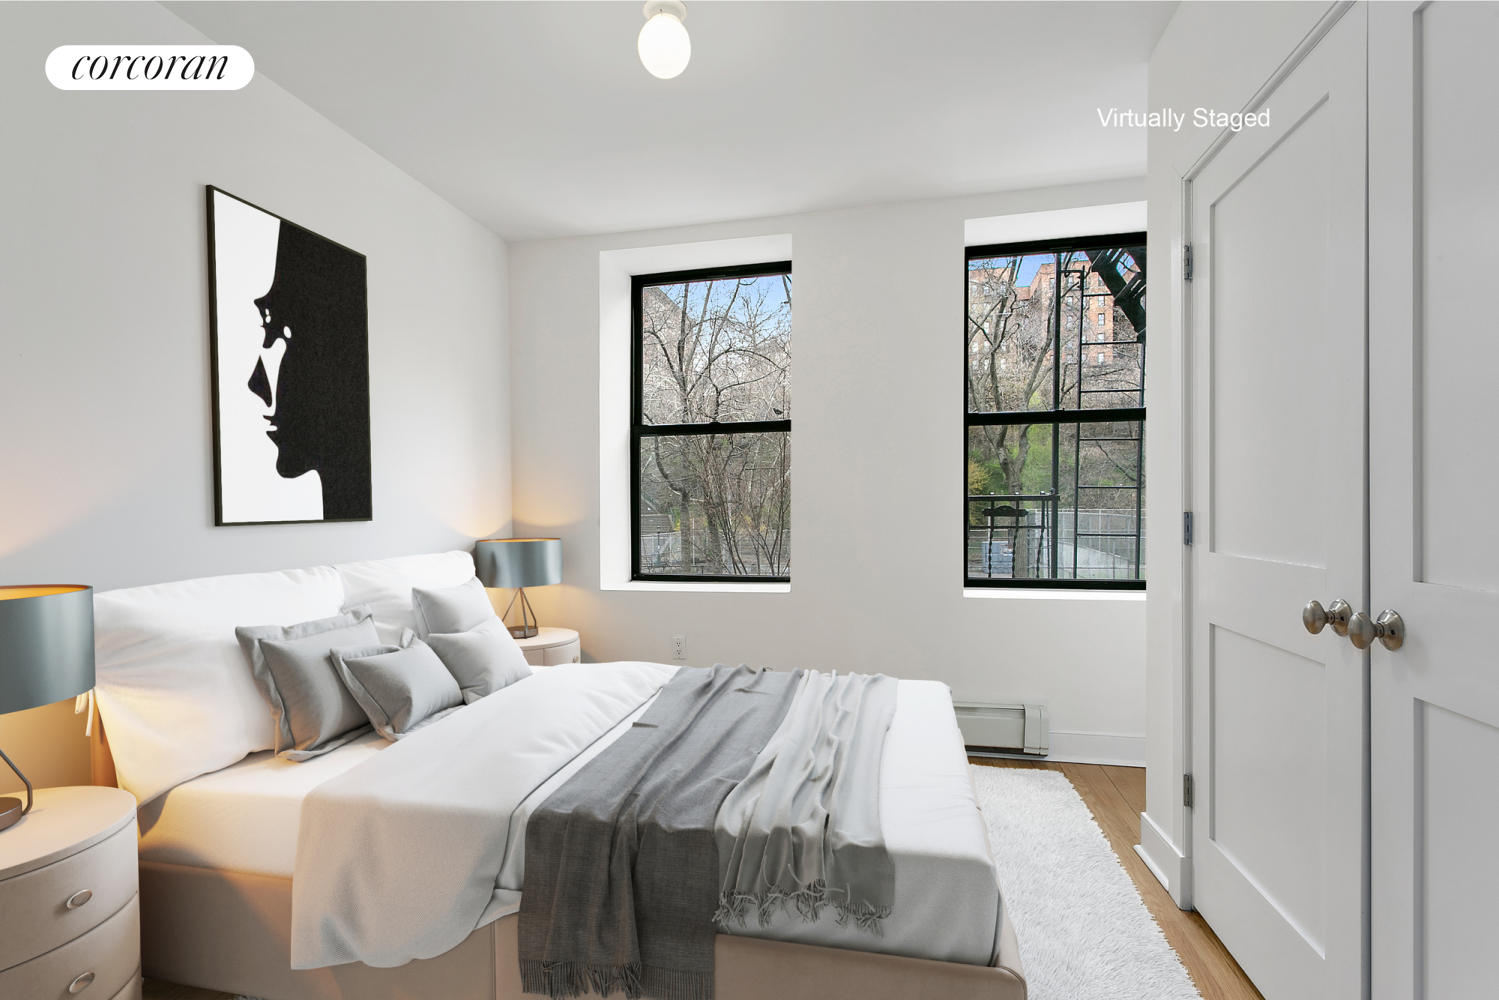 305 West 150th Street 205, Central Harlem, Upper Manhattan, NYC - 1 Bedrooms  
1 Bathrooms  
3 Rooms - 